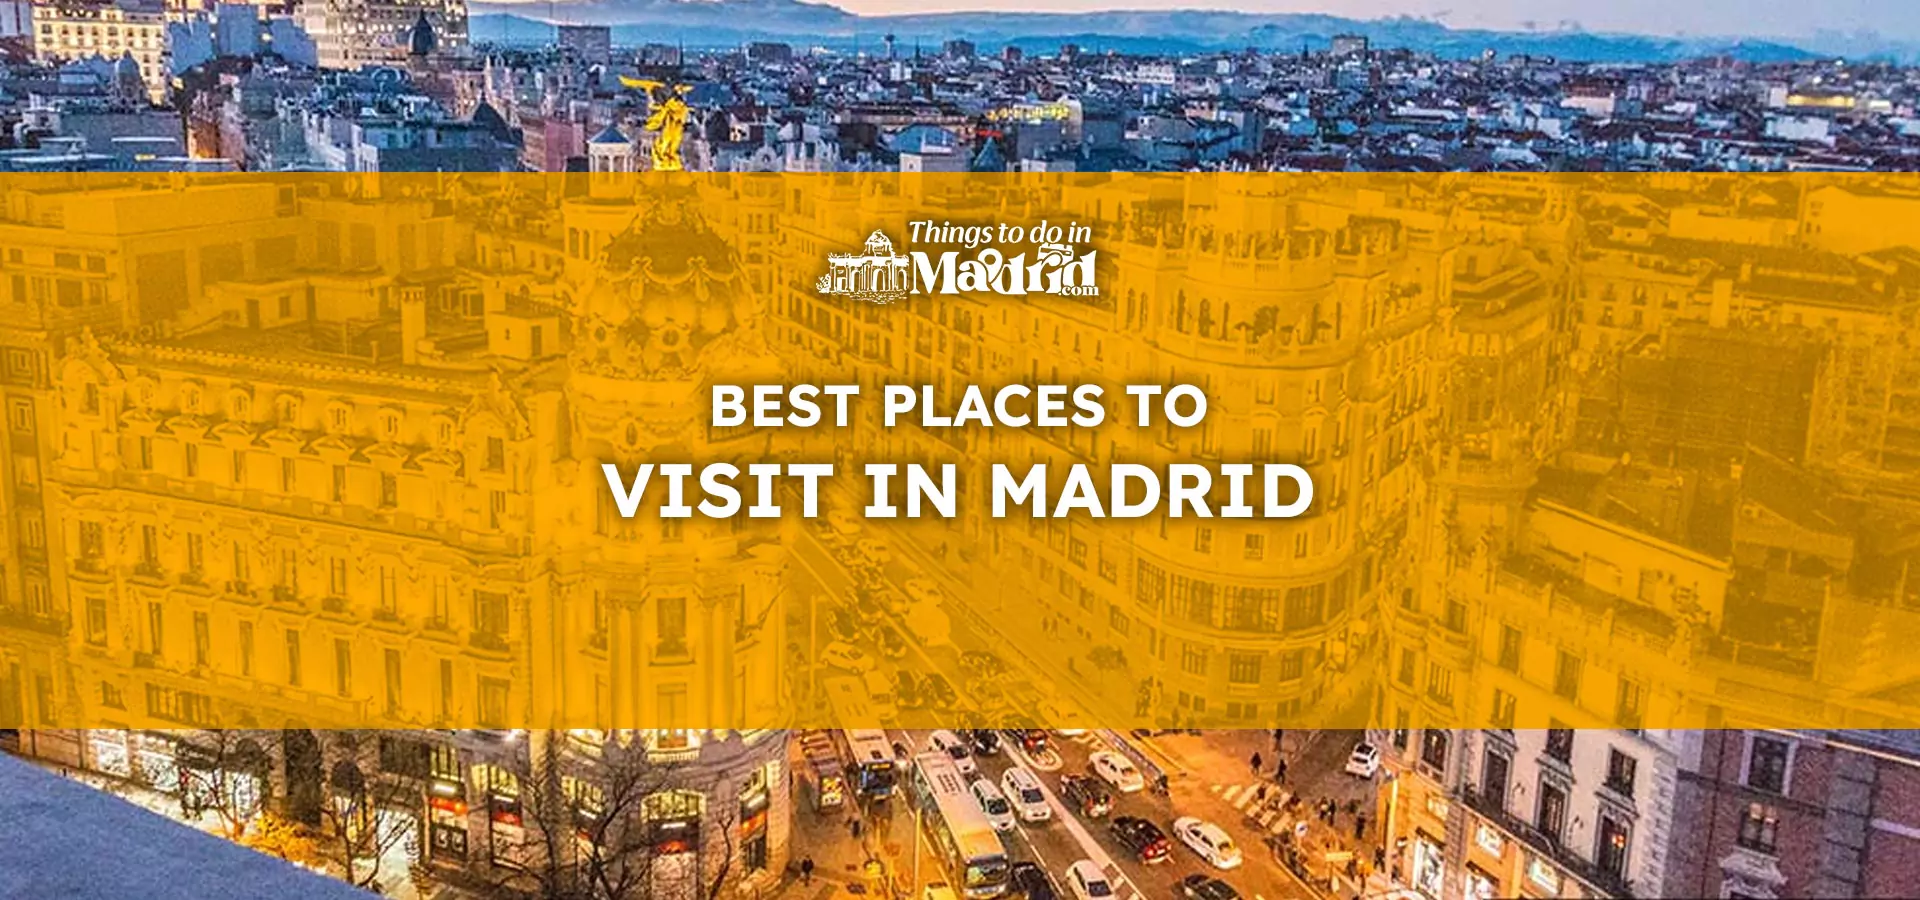 best-places-to-visit-in-madrid